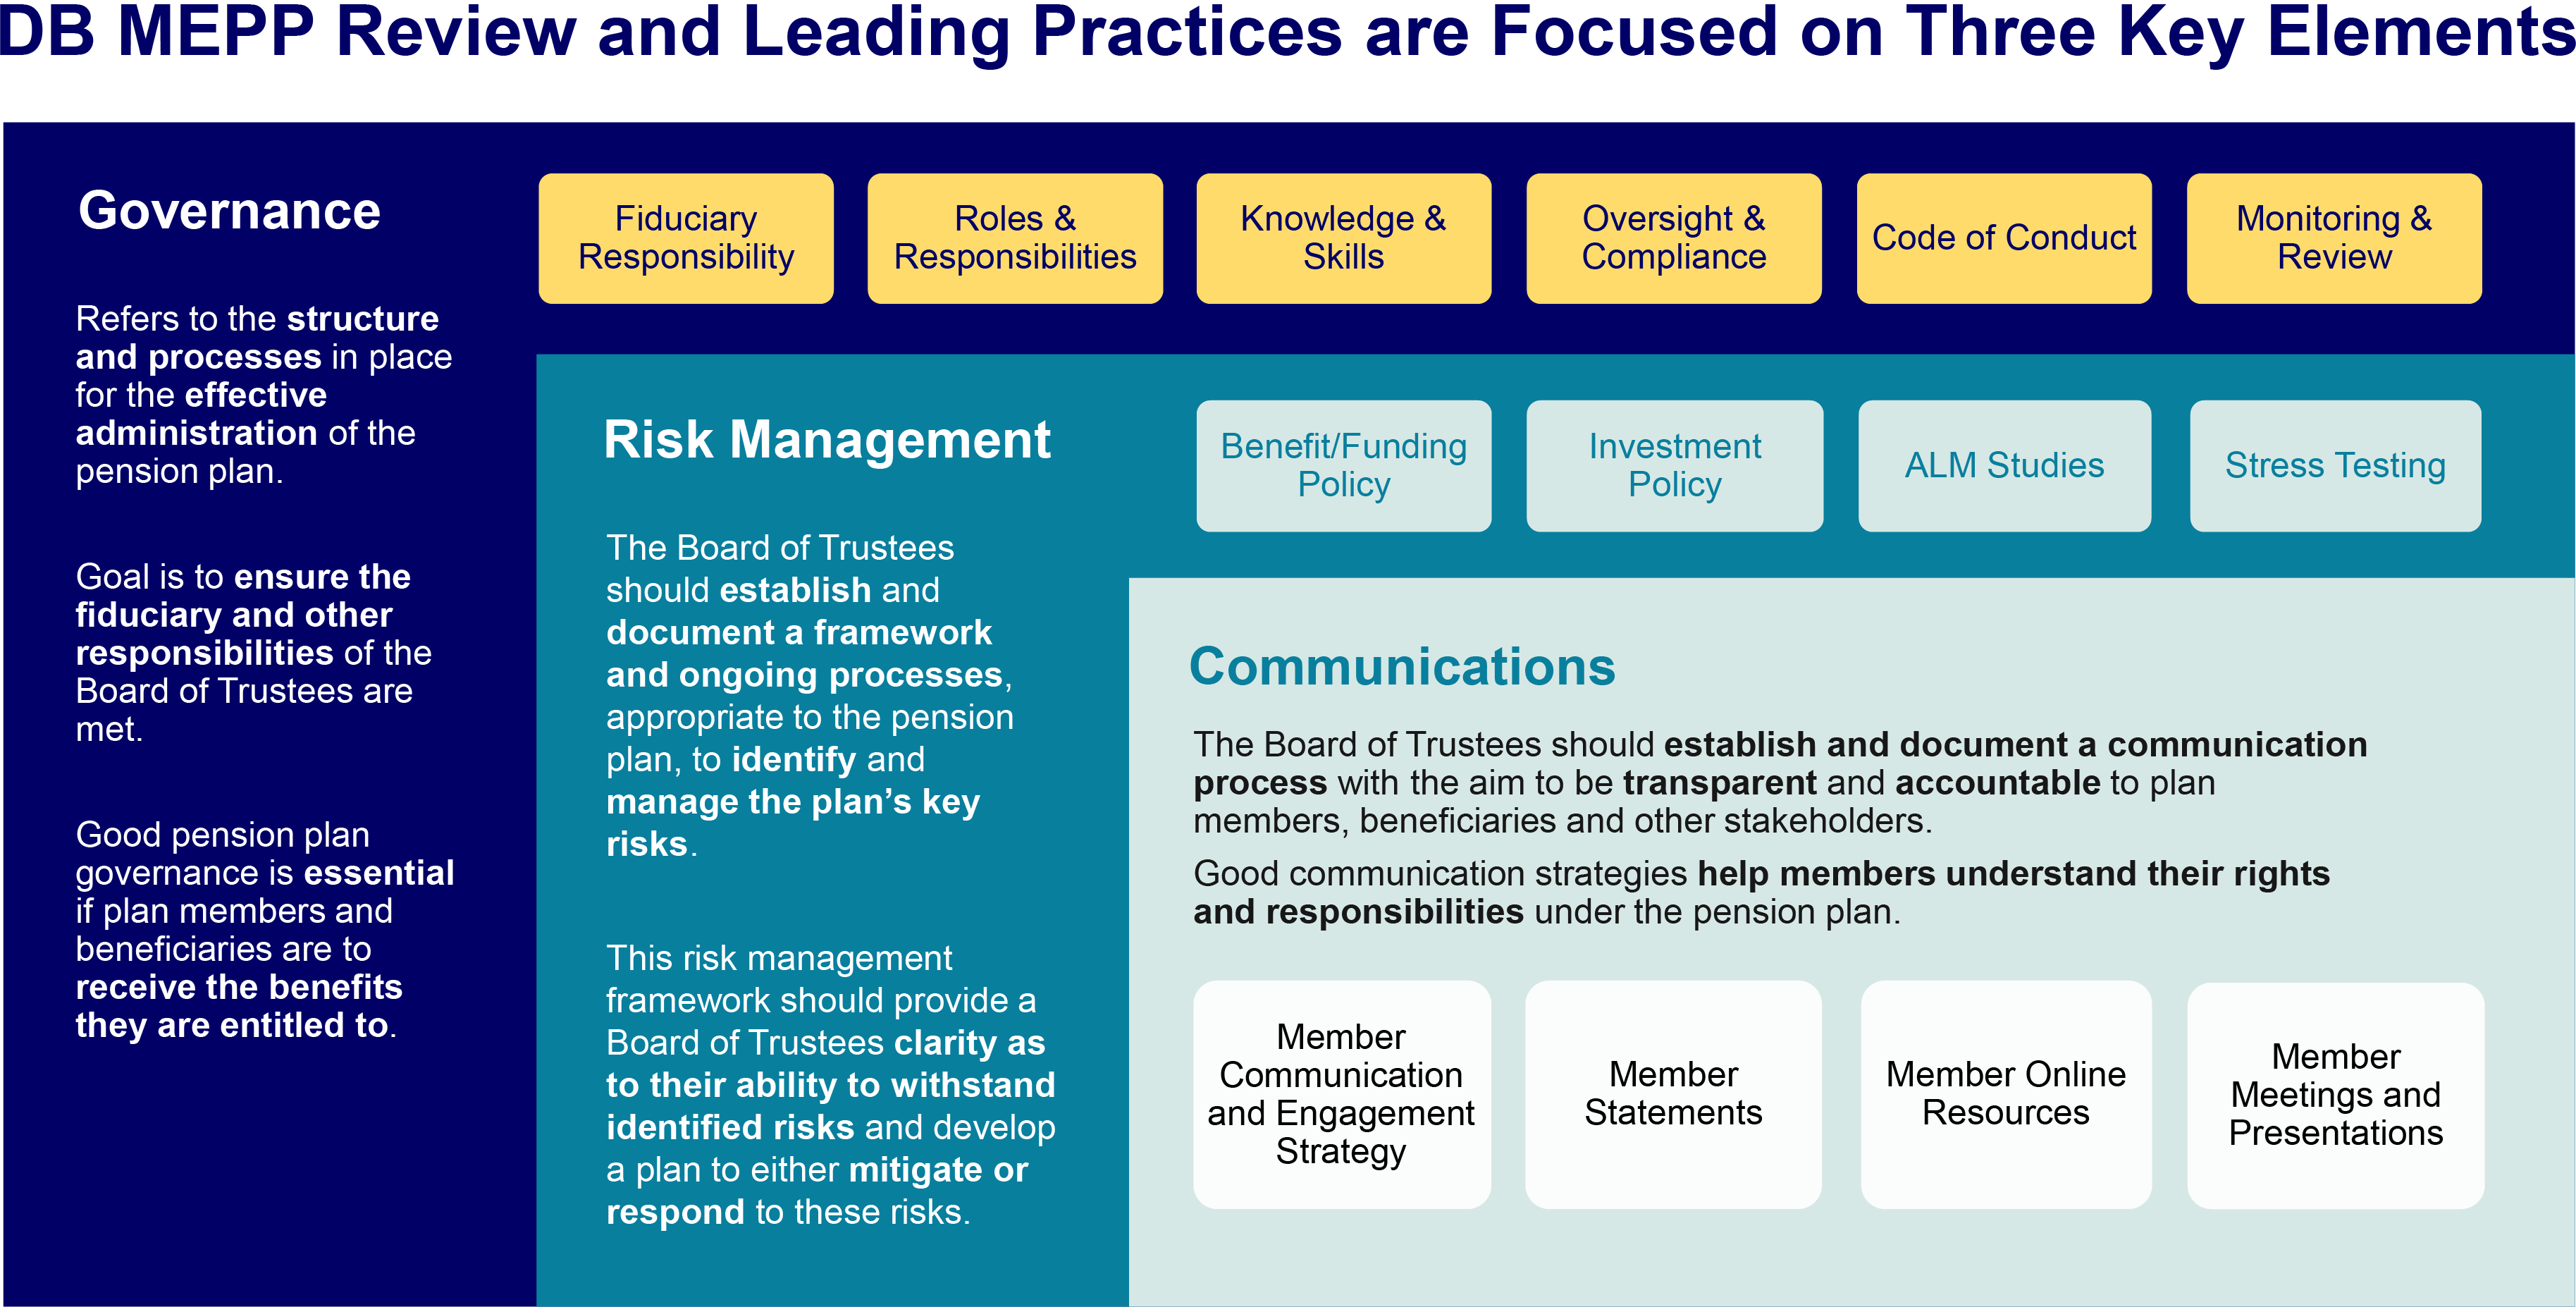 DB MEPP Review and Leading Practices are Focused on Three Key Elements